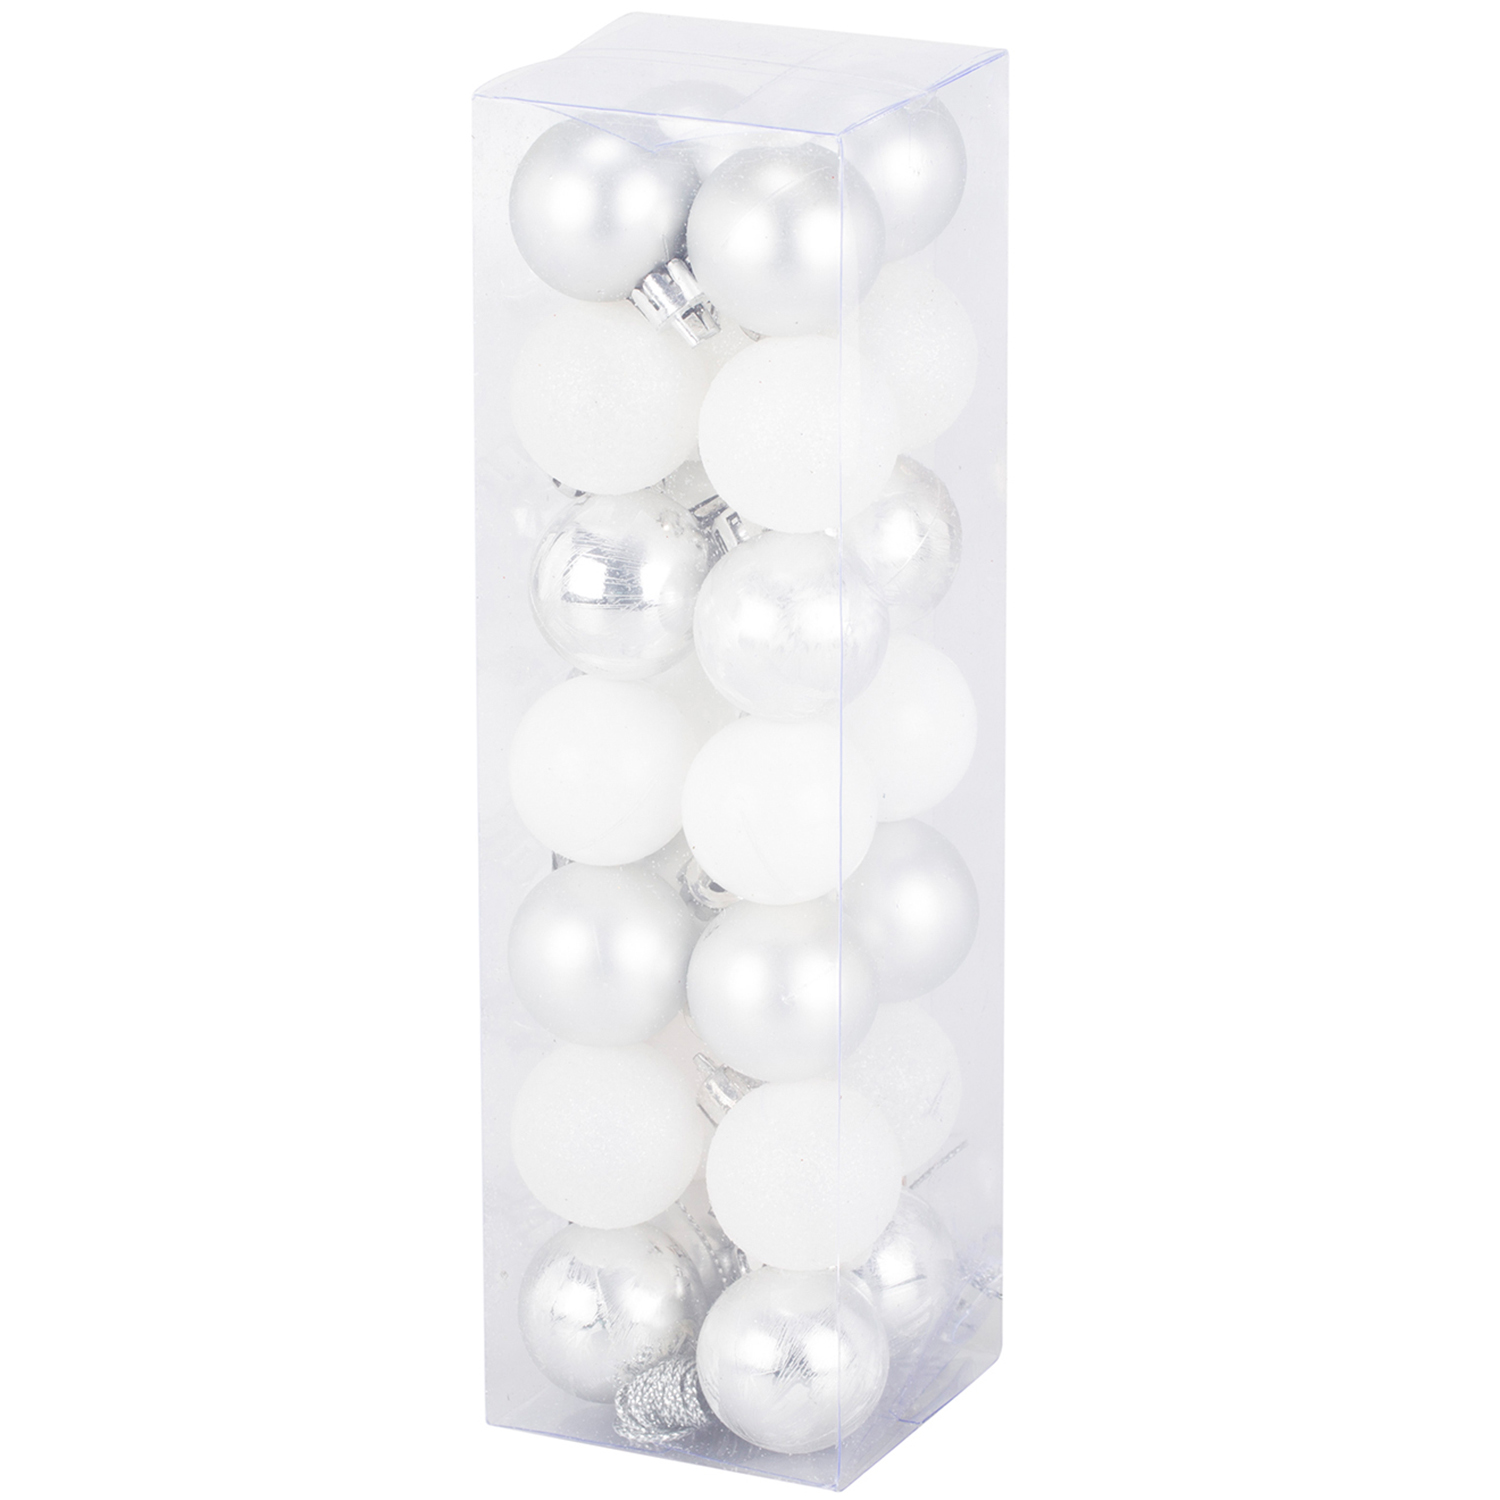 Midnight Fantasy Silver and White Baubles 28 Pack Image